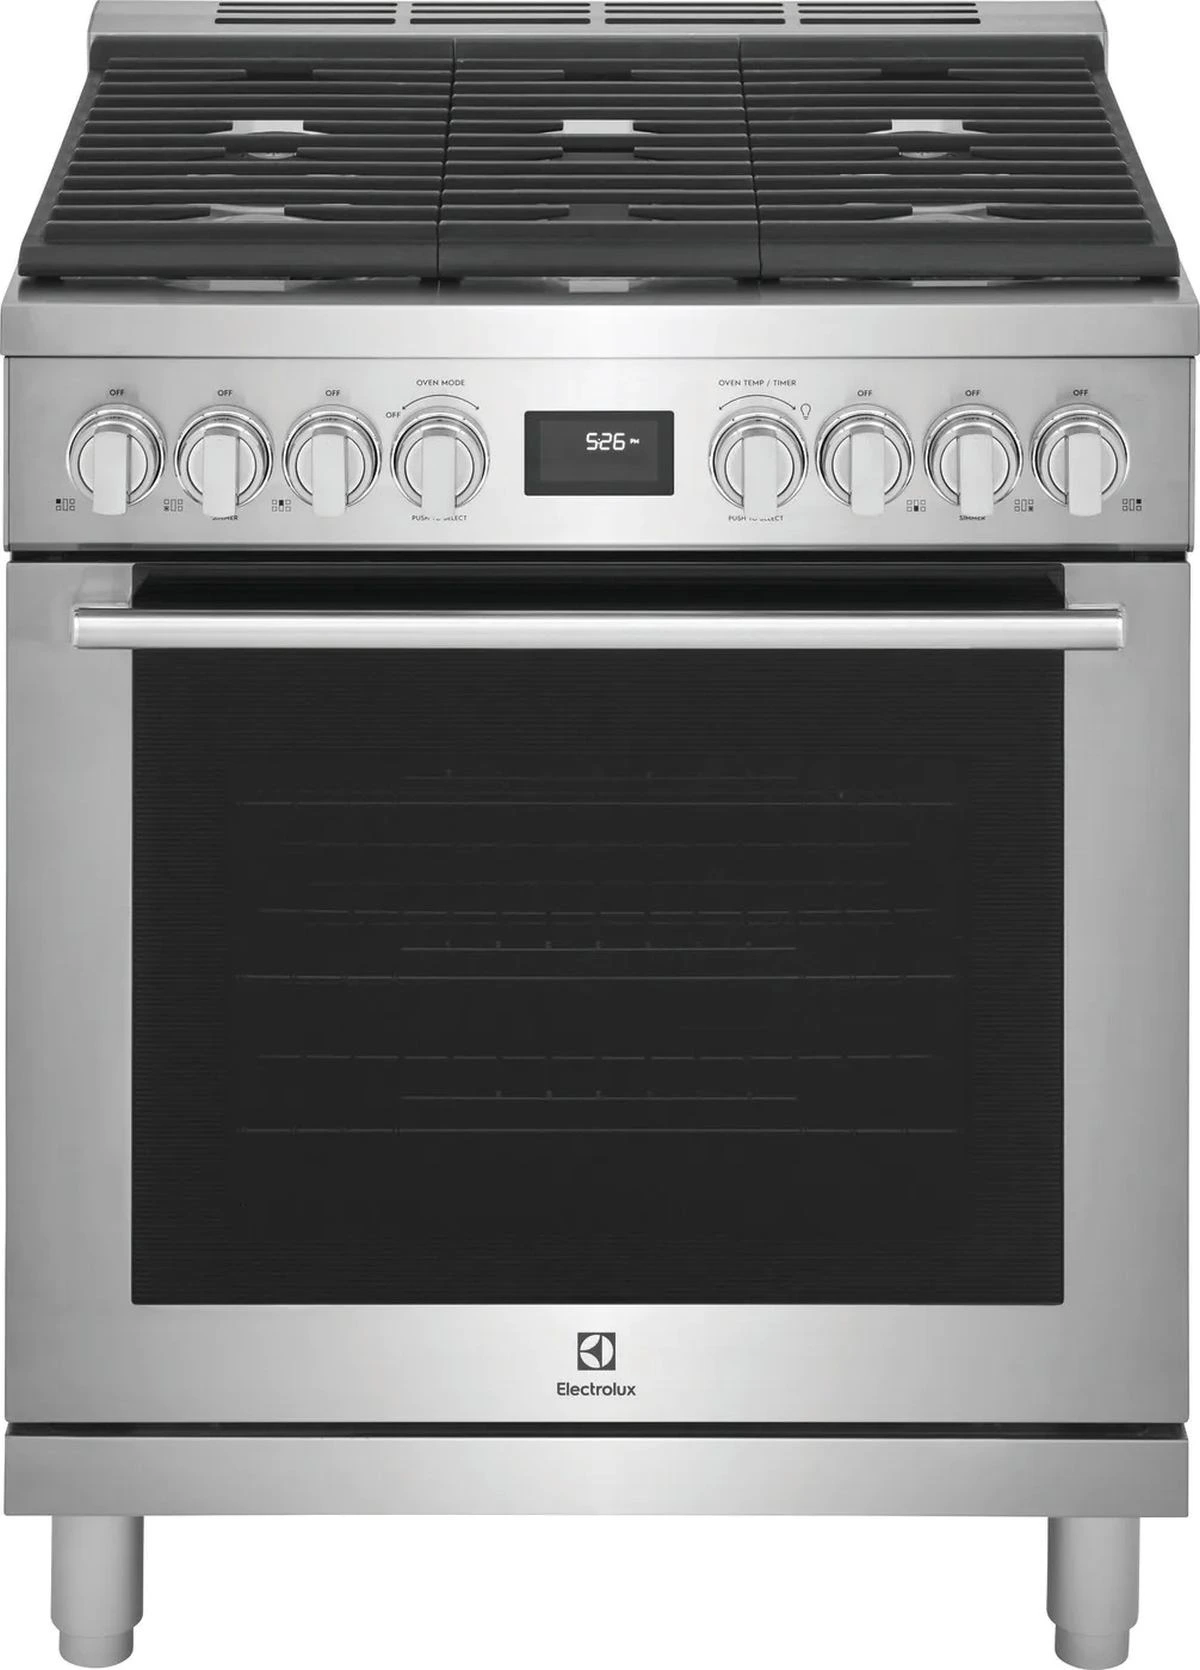 Front view of the Electrolux ECFG3068AS 30” gas range 